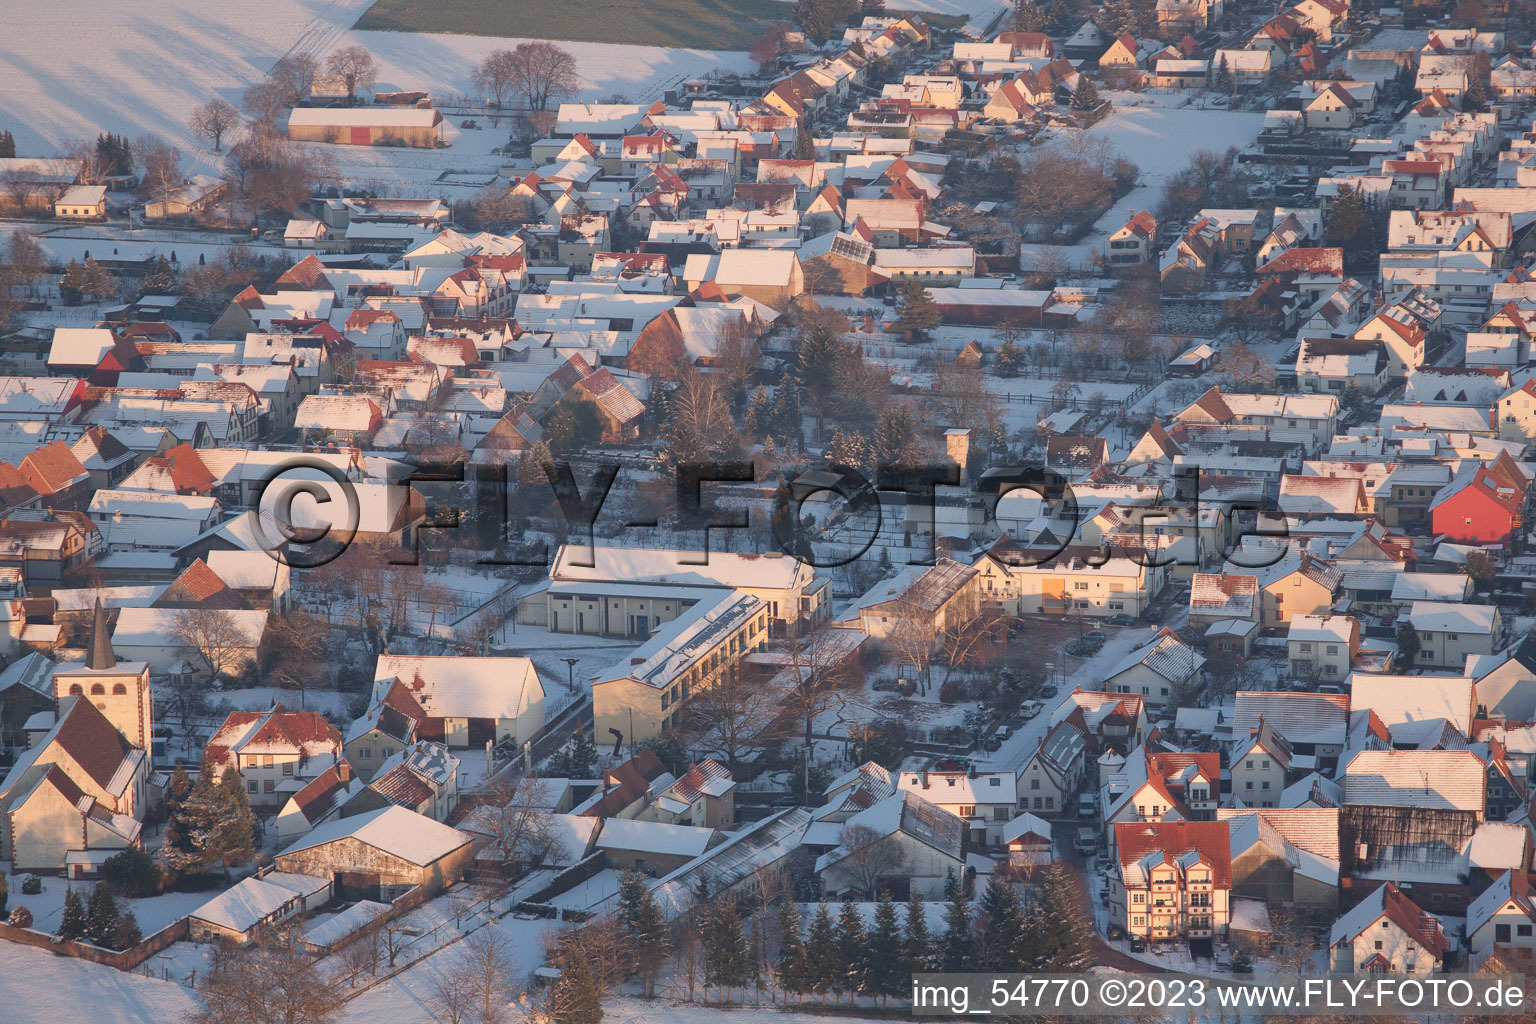 Minfeld in the state Rhineland-Palatinate, Germany from a drone